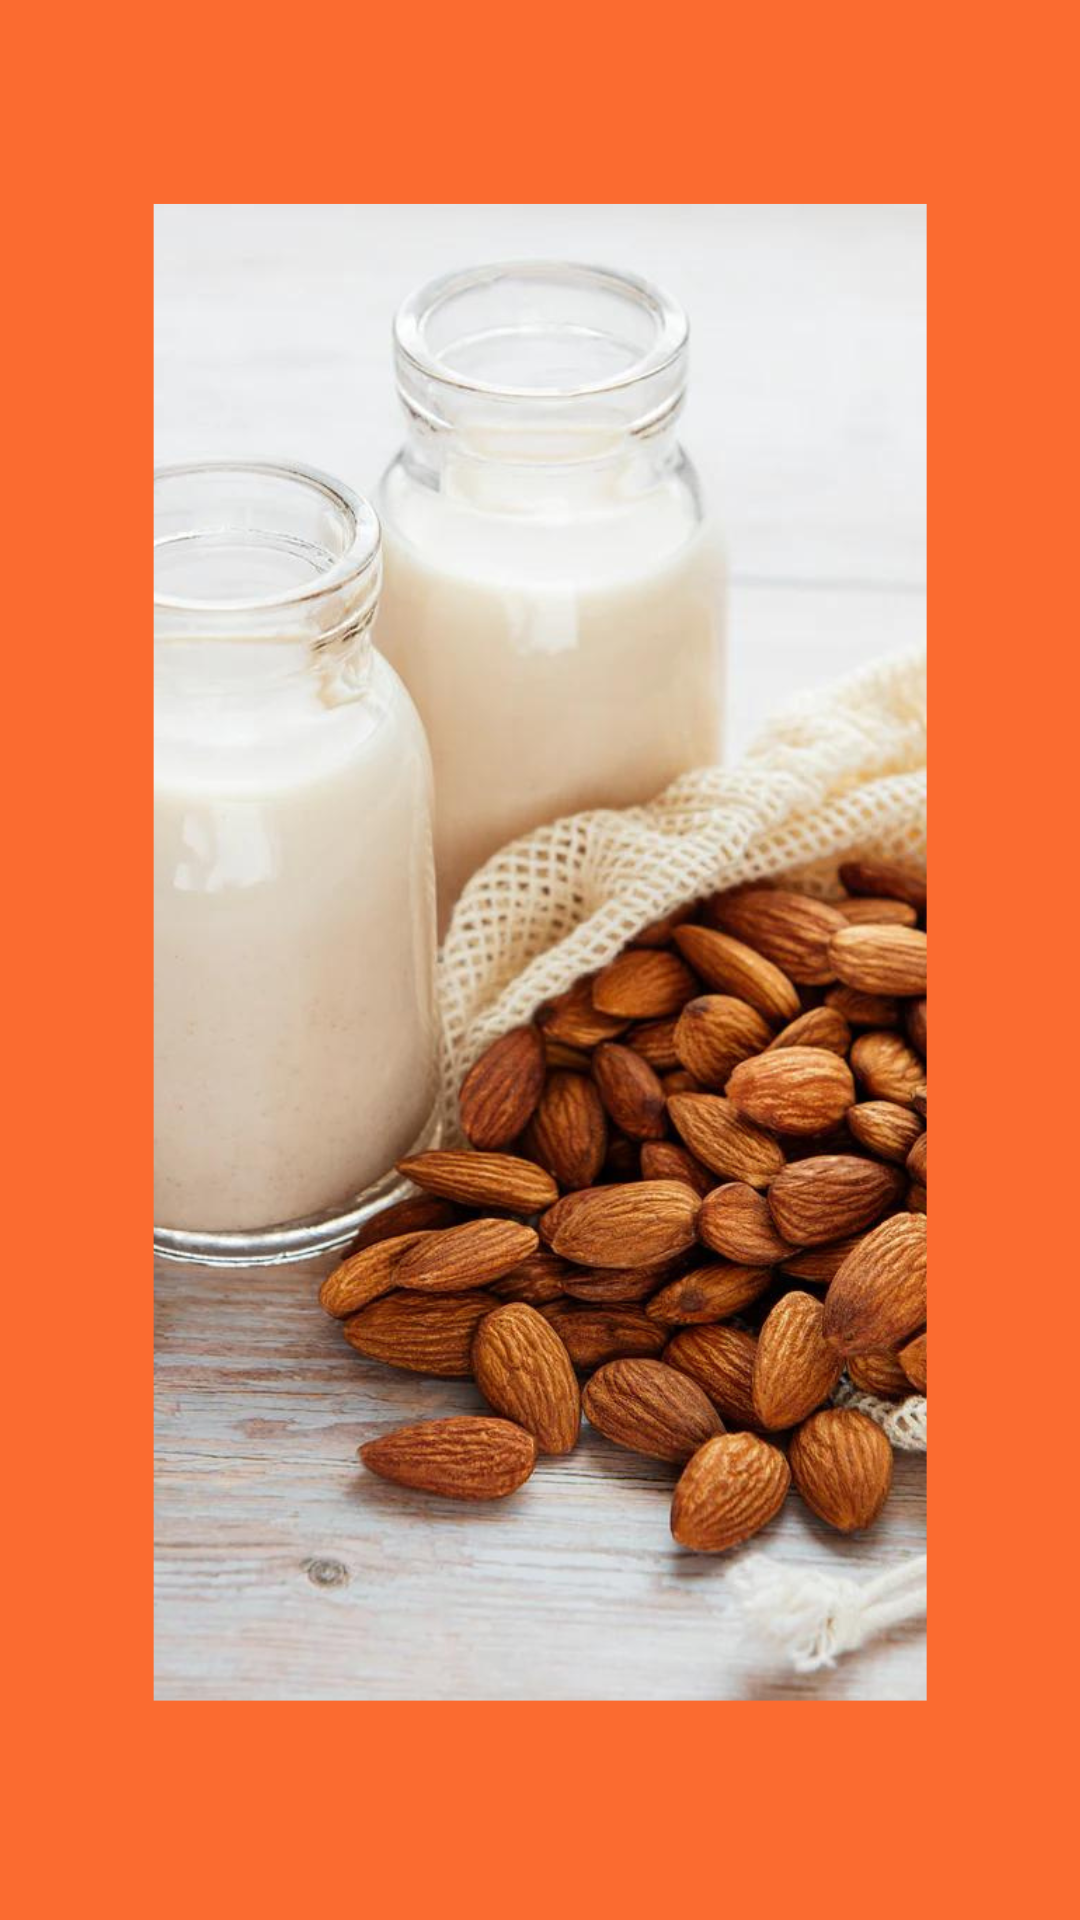 What are the Advantages of Almond Milk Over Dairy Milk?